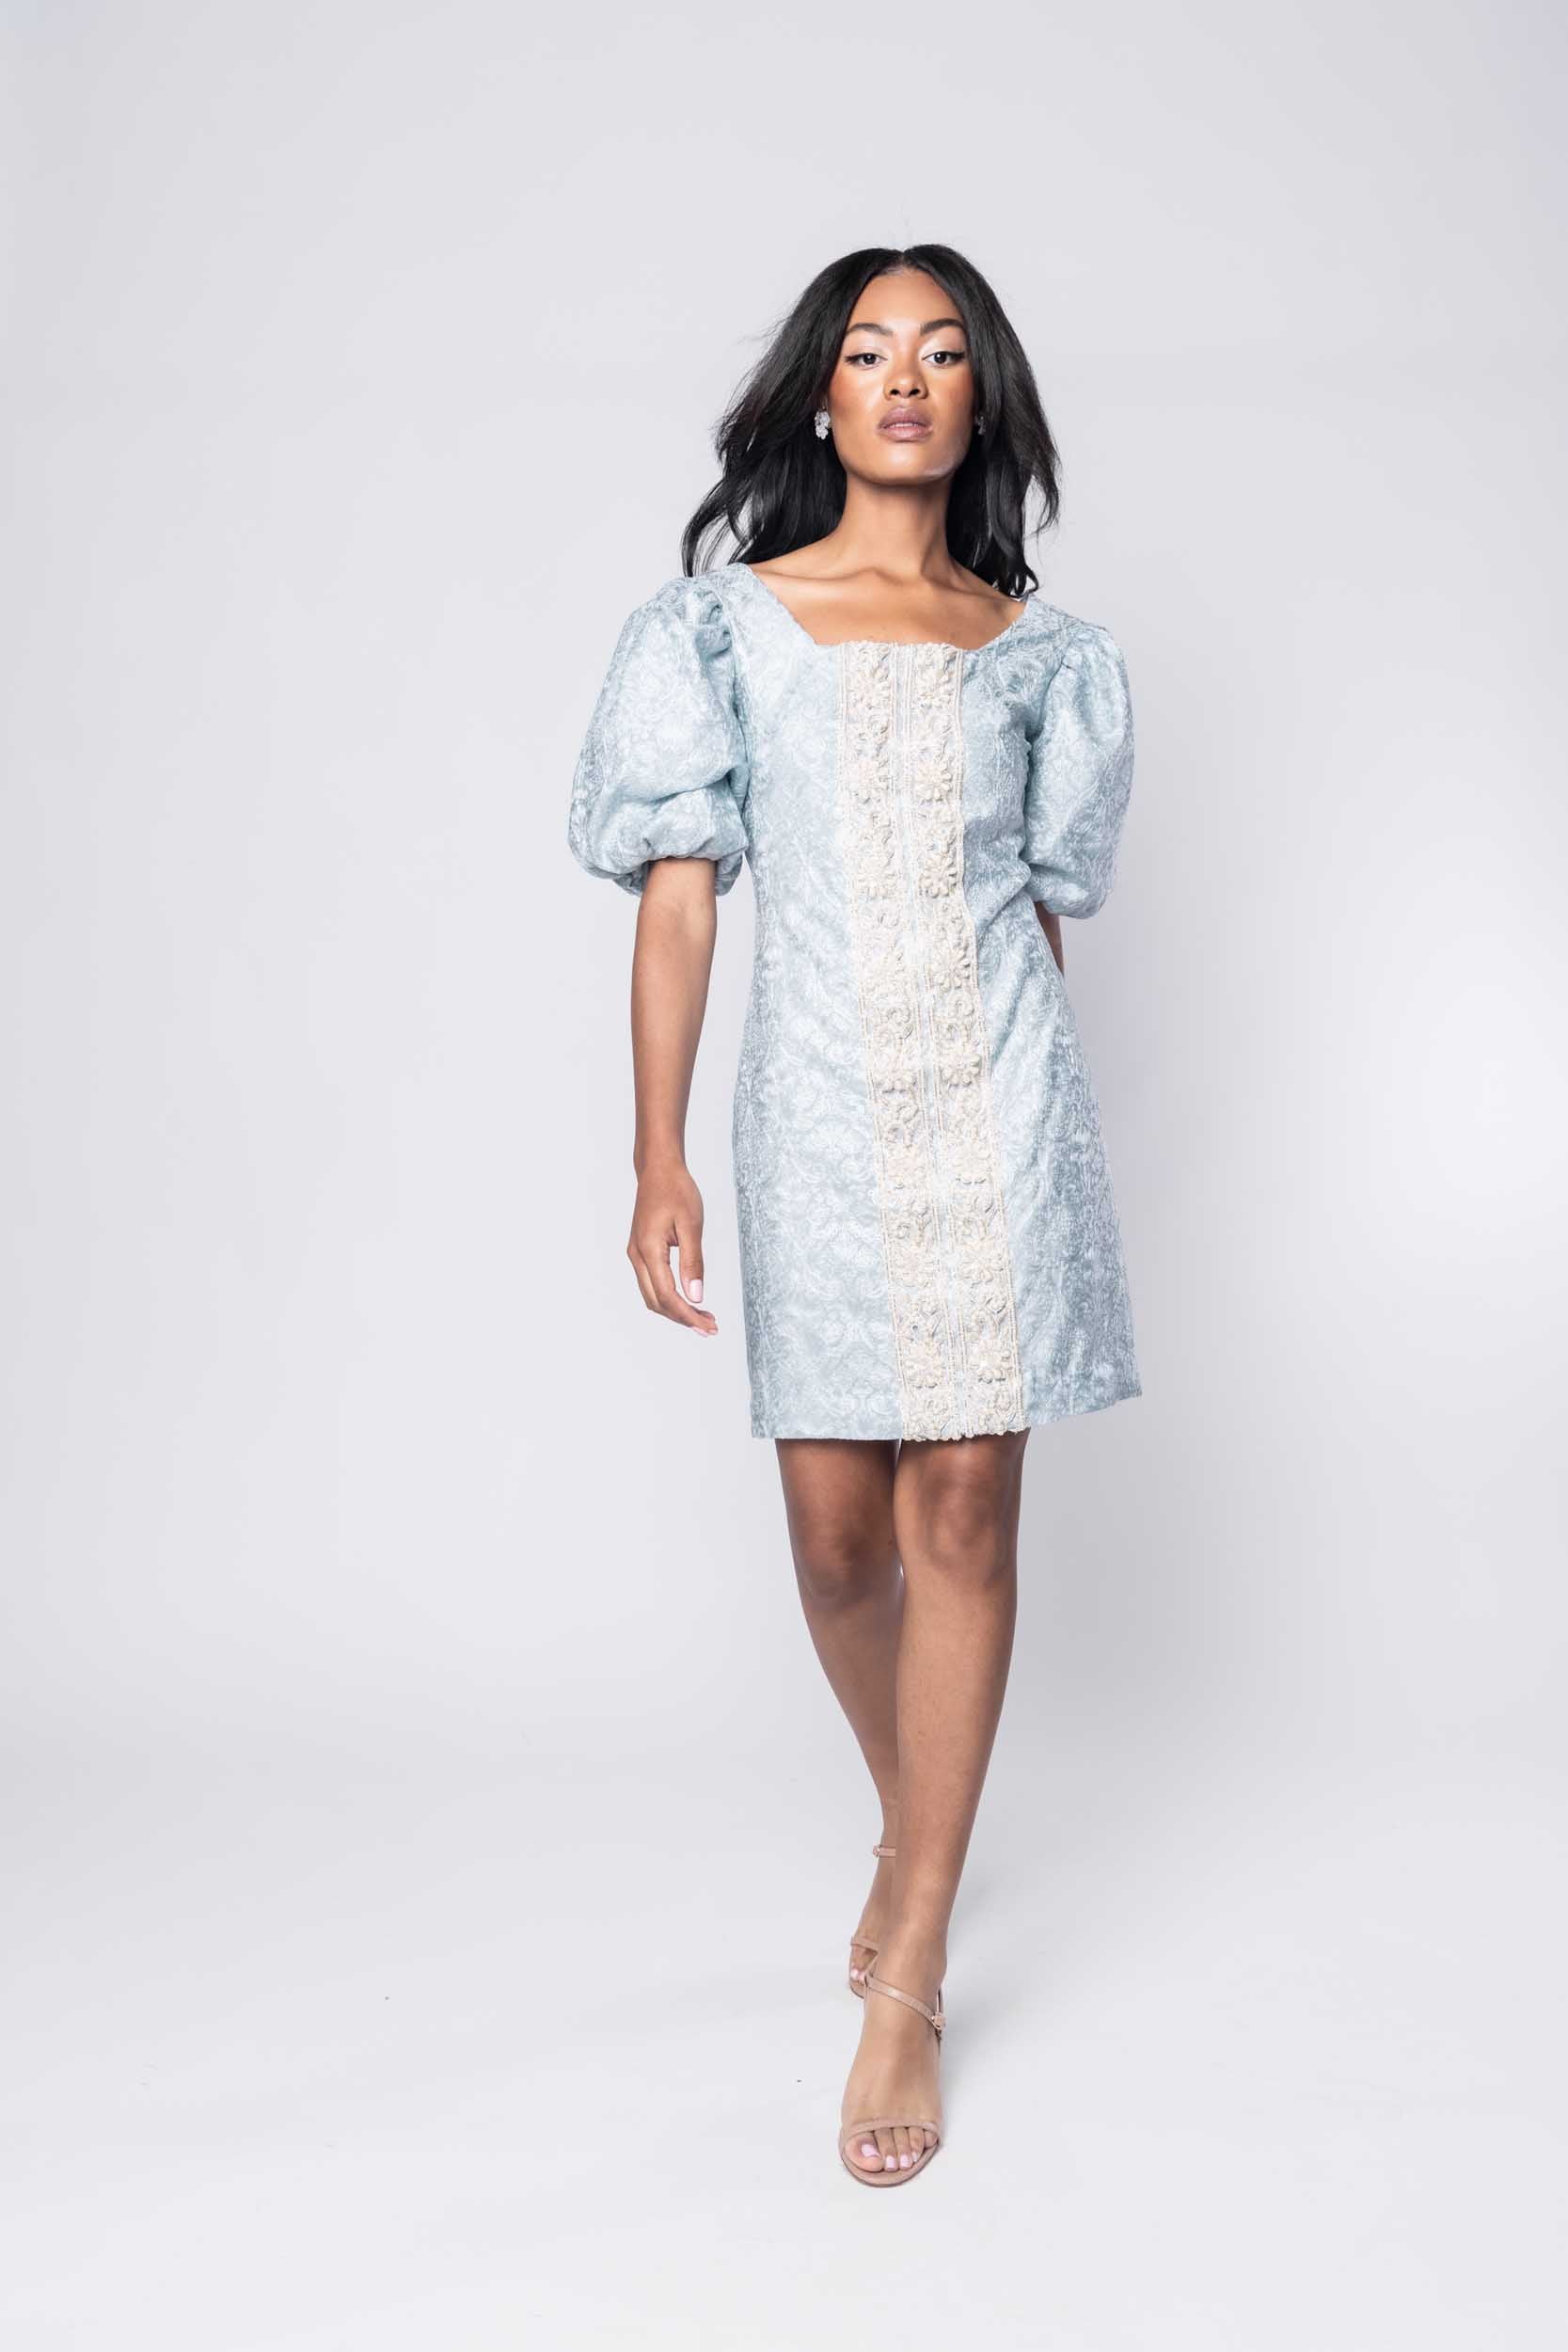 Beautiful model in a pale blue beaded ornate cocktail dress by Sujata Gazder - front view movement